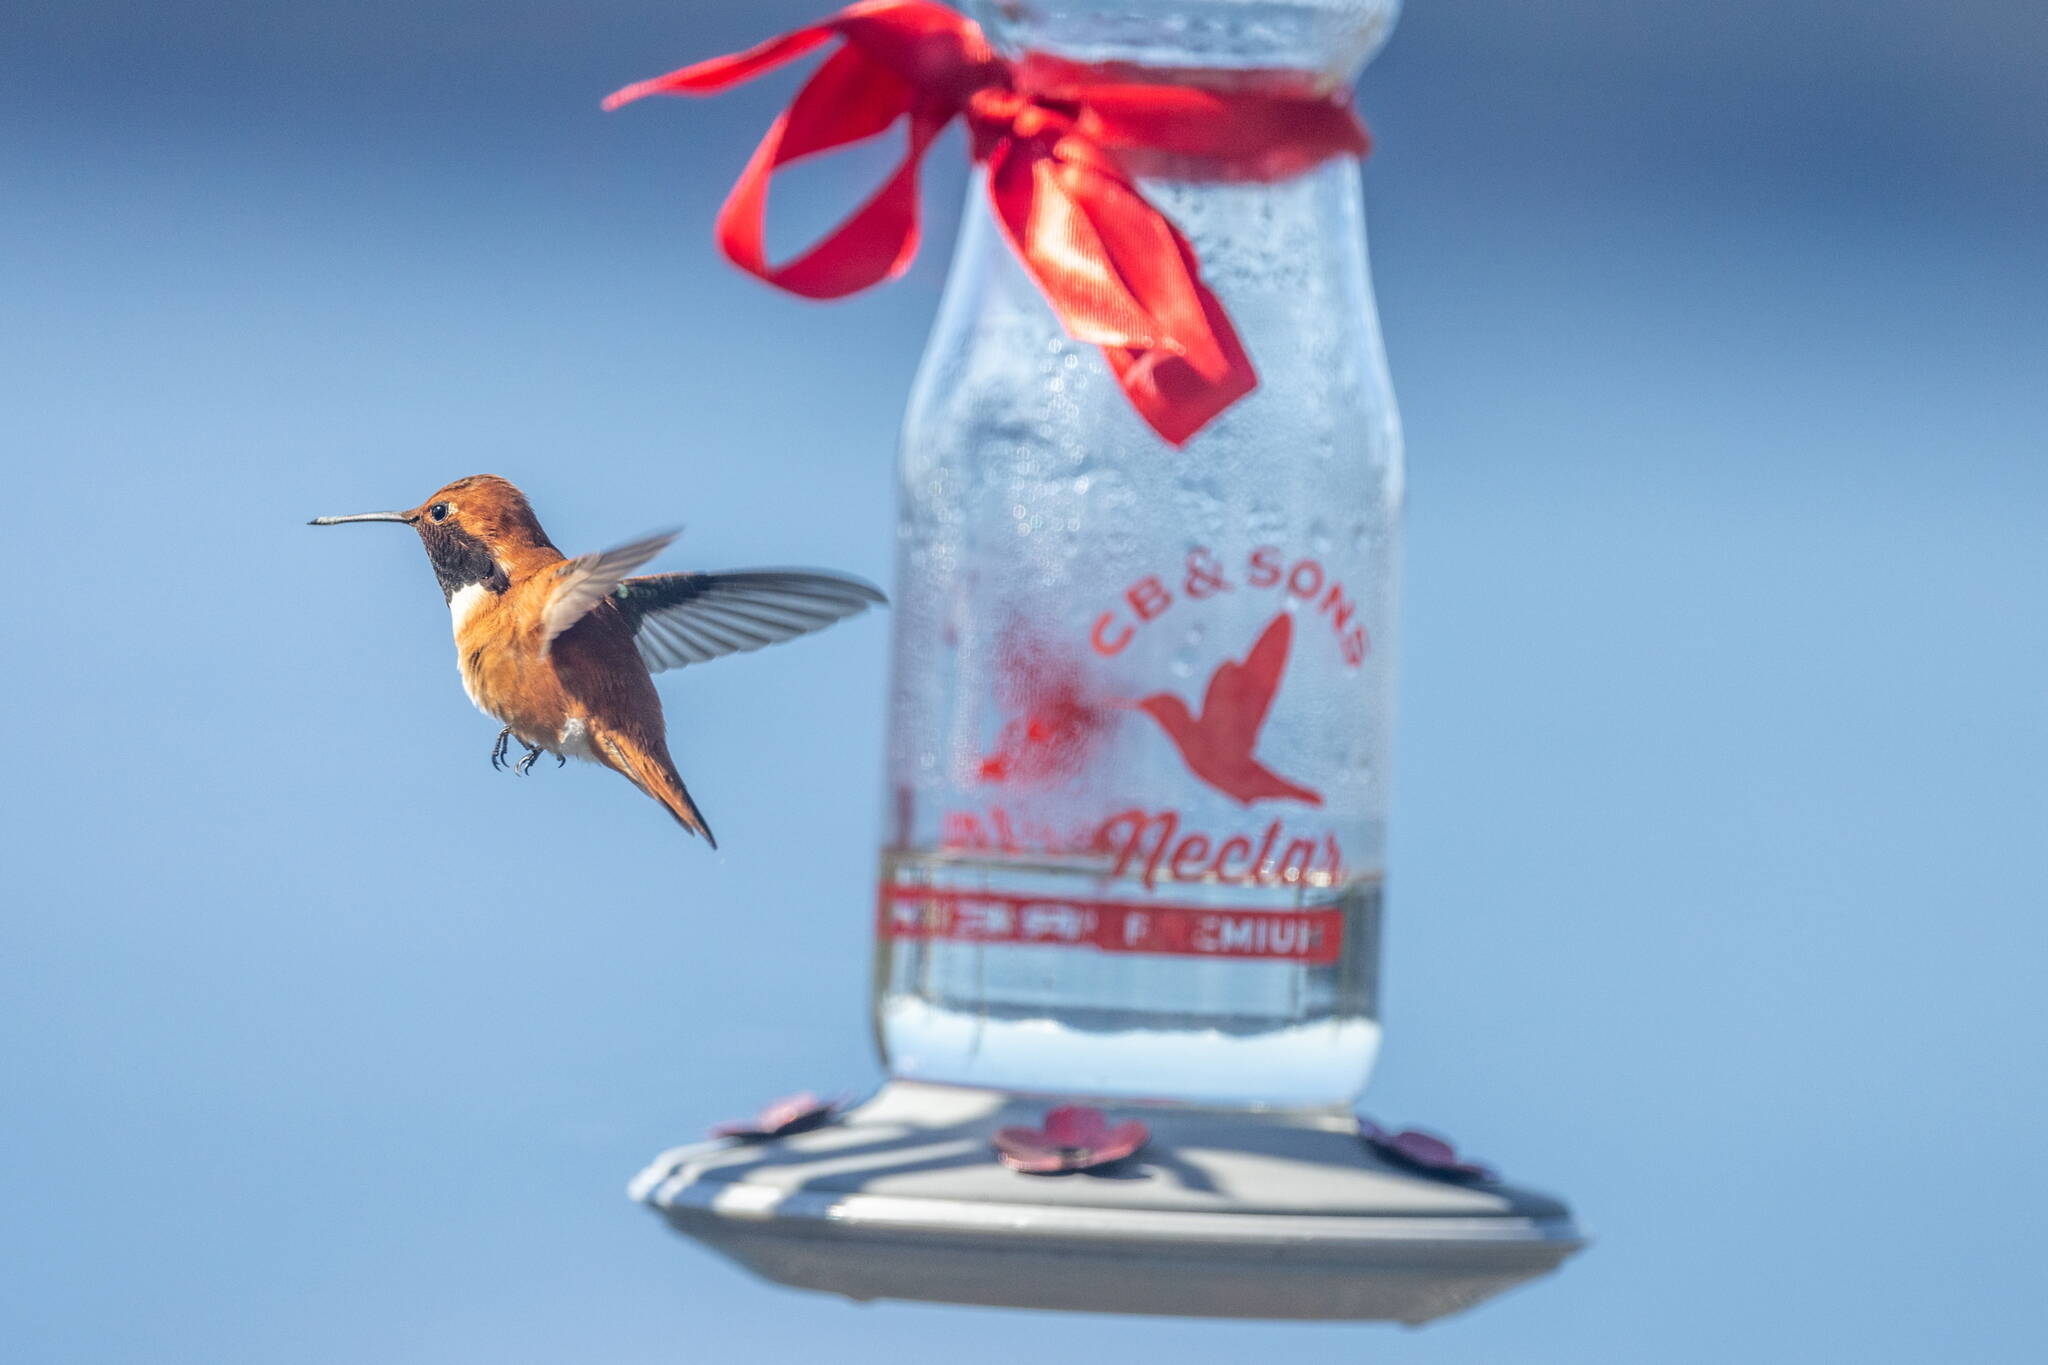 A Rufous hummingbird hovers near a glass hummingbird feeder filled with homemade liquid food. Keeping the feeder clean is important to prevent mold, bacteria and disease. (Photo by Kerry Howard)